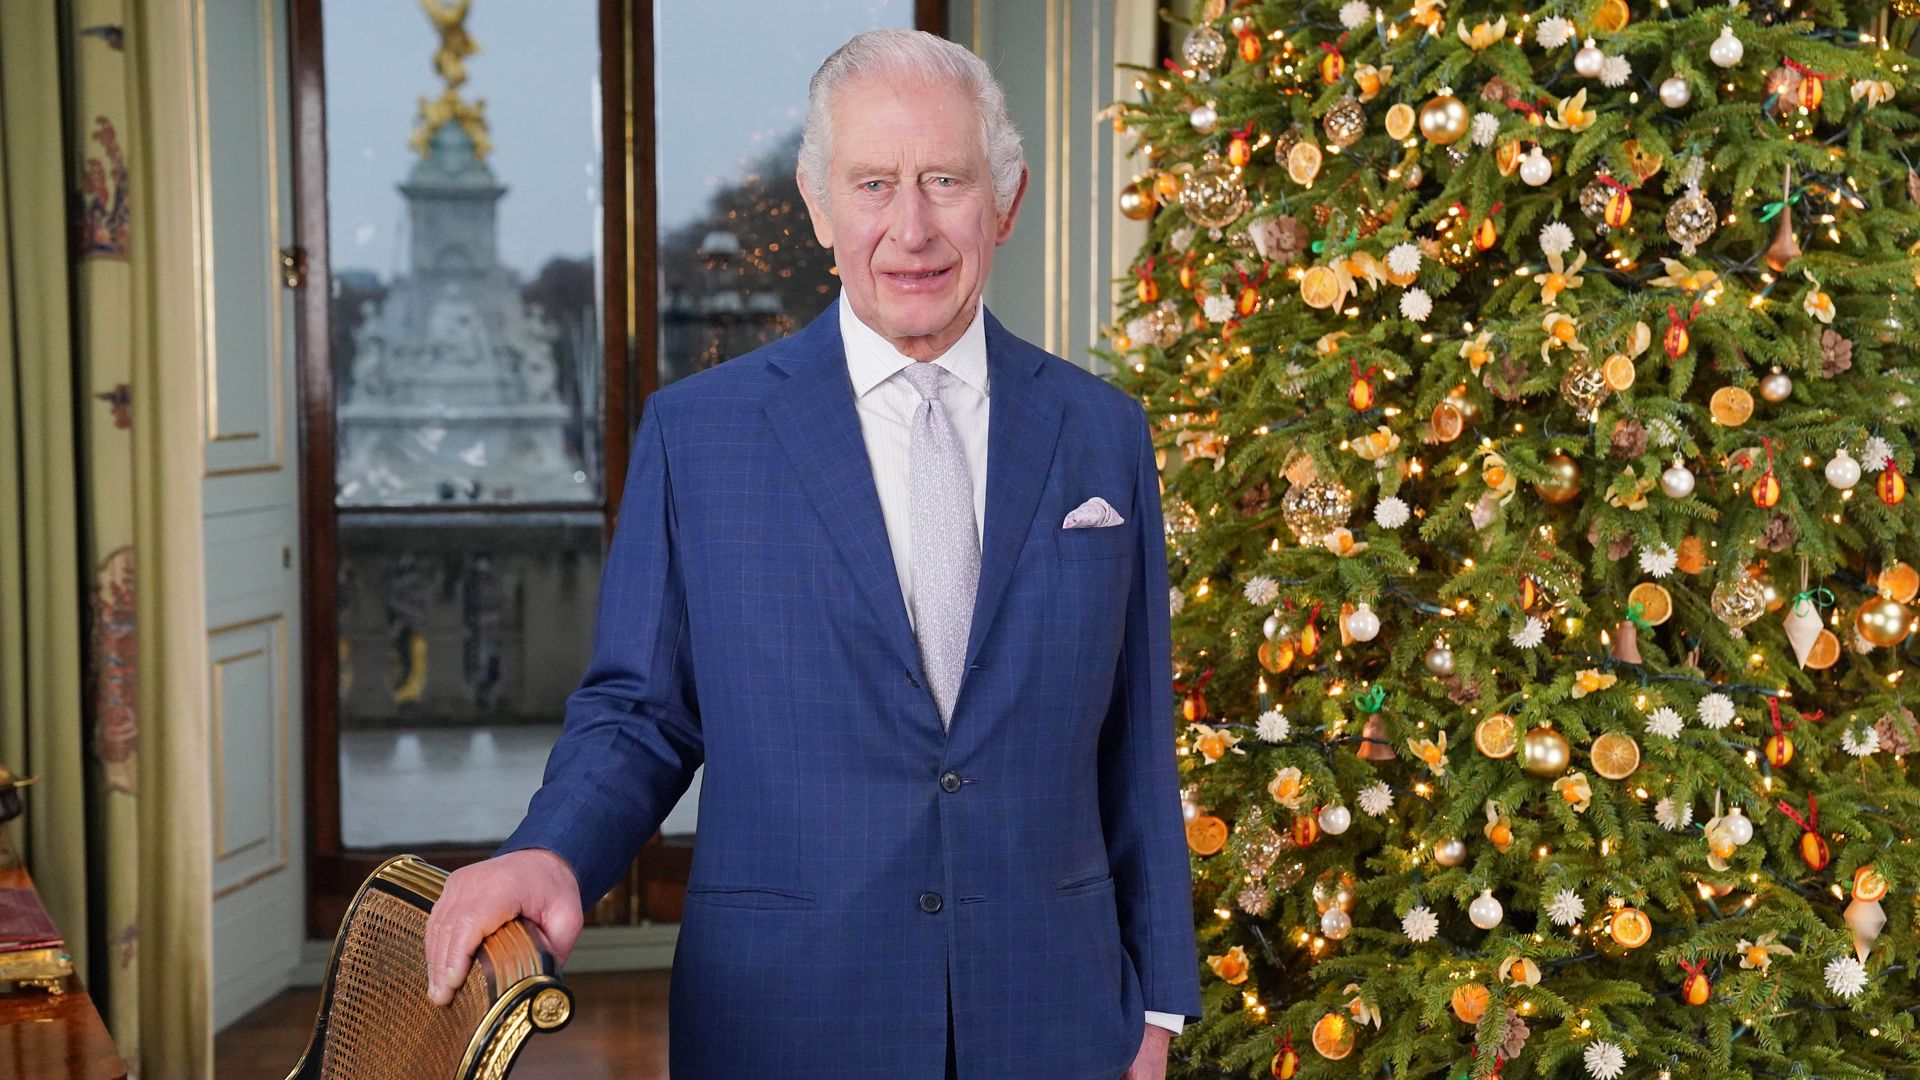 King Charles in a blue suit next to a Christmas tree